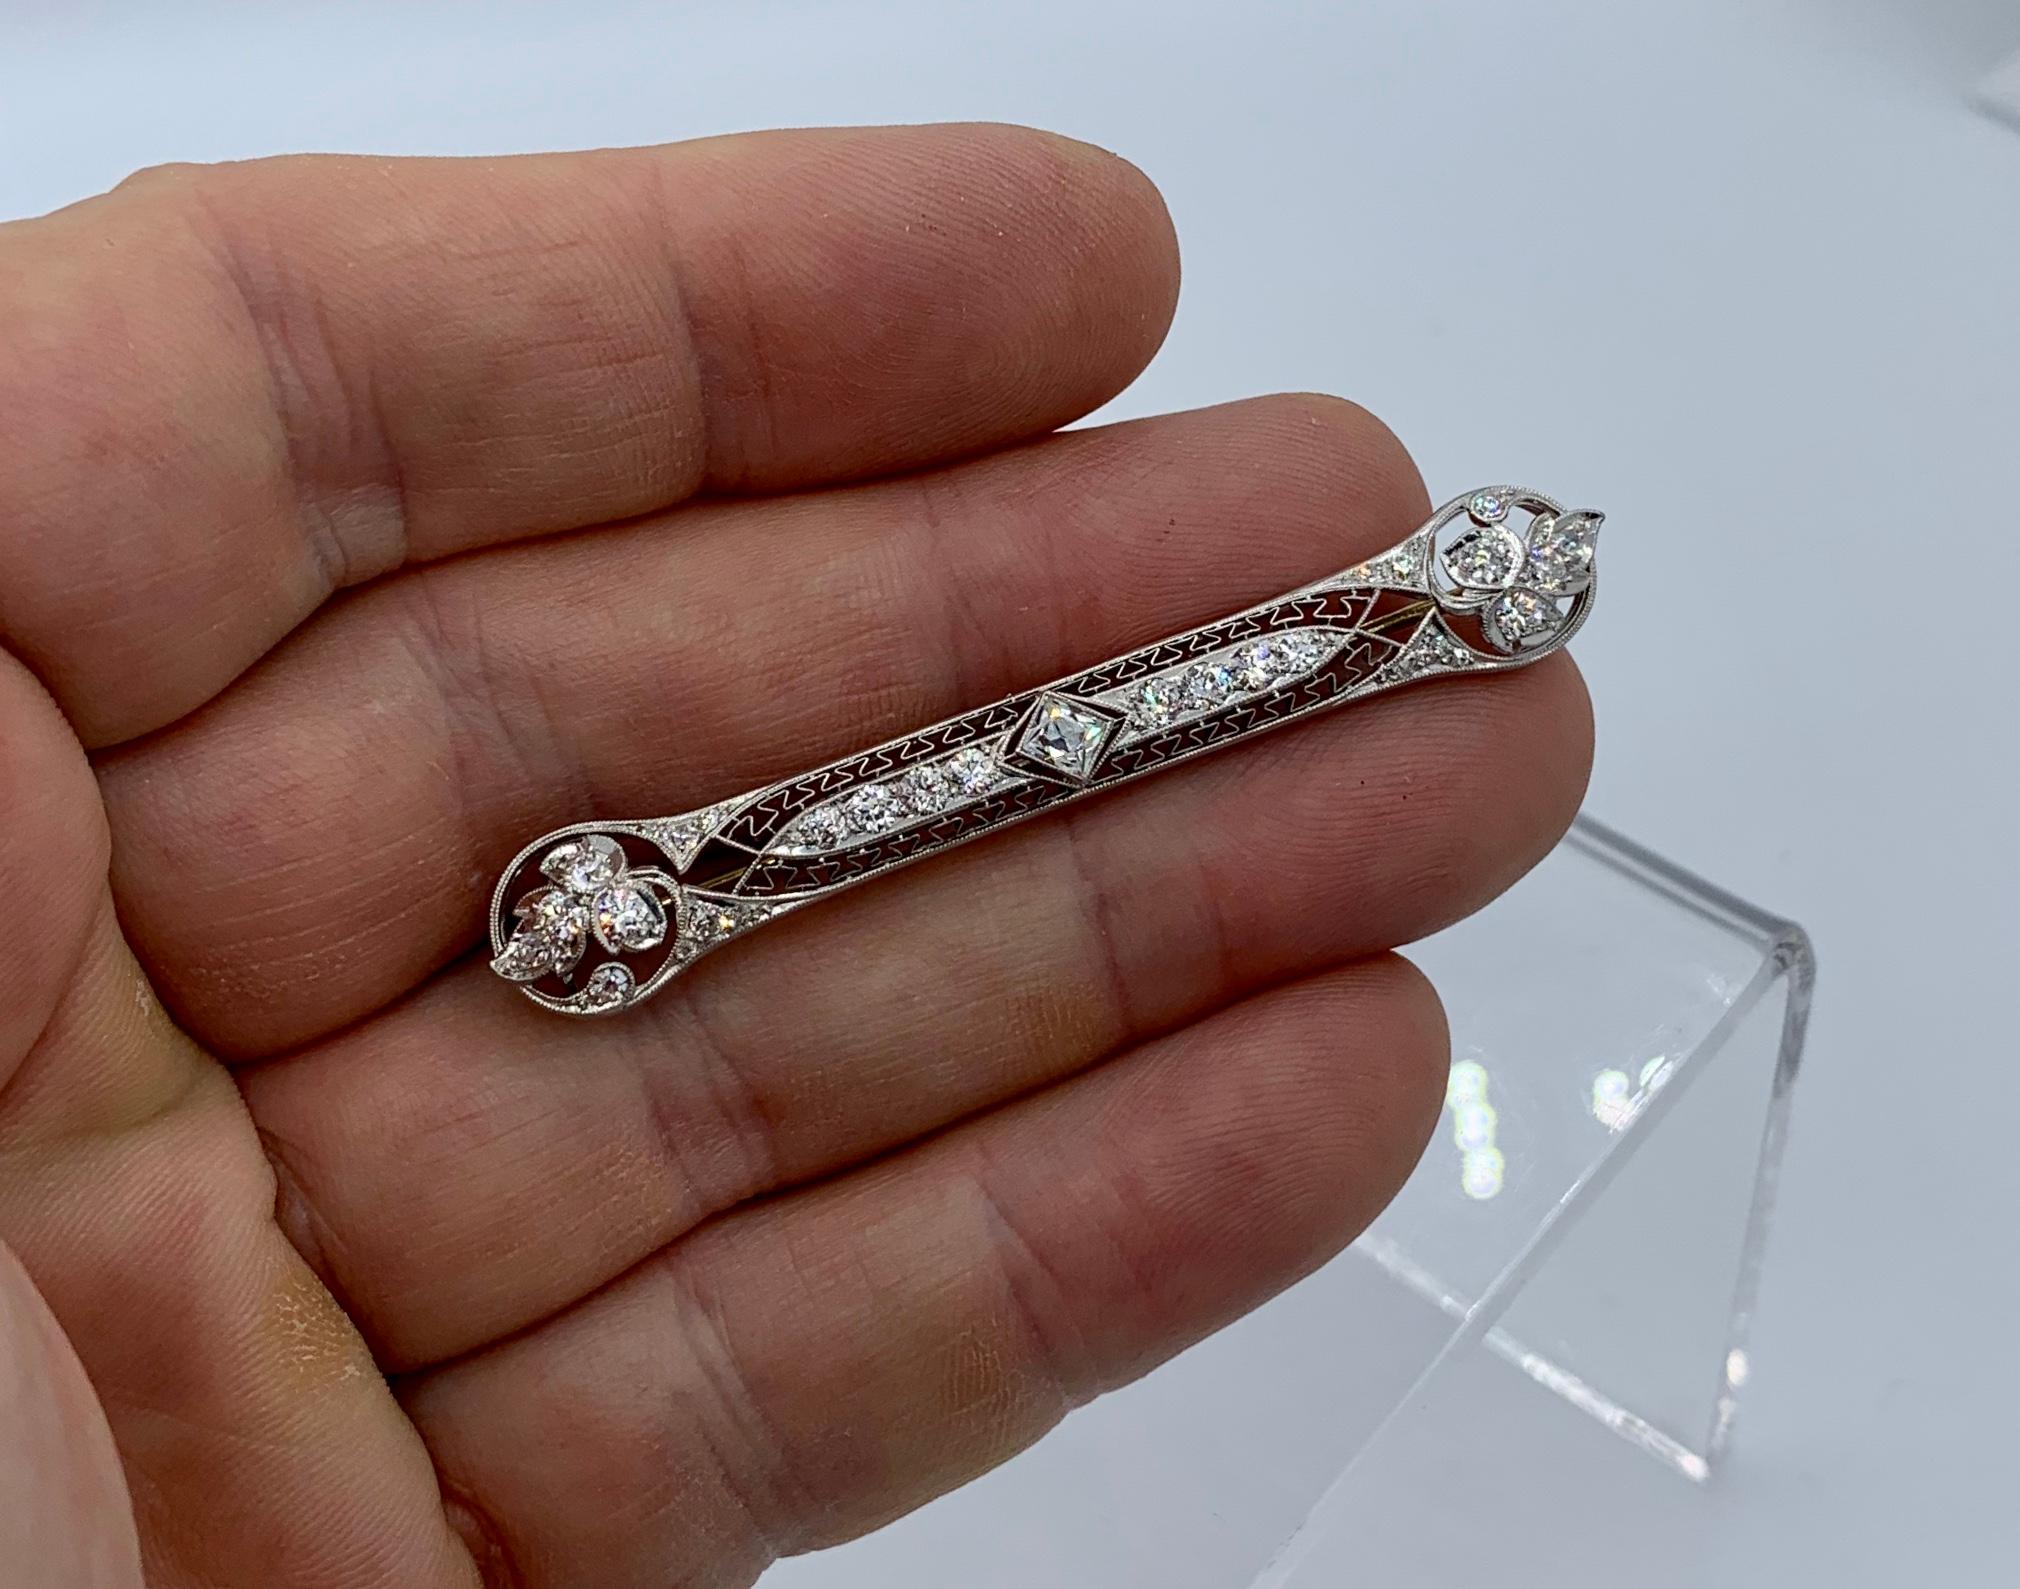 This is an extraordinary Diamond Platinum Tiffany & Co. Edwardian - Art Deco Brooch Pin with approximately 2.5 Carats of magnificent Old Mine Cut Tiffany Diamonds set in Platinum in an open work scroll and leaf motif design of the highest quality.  